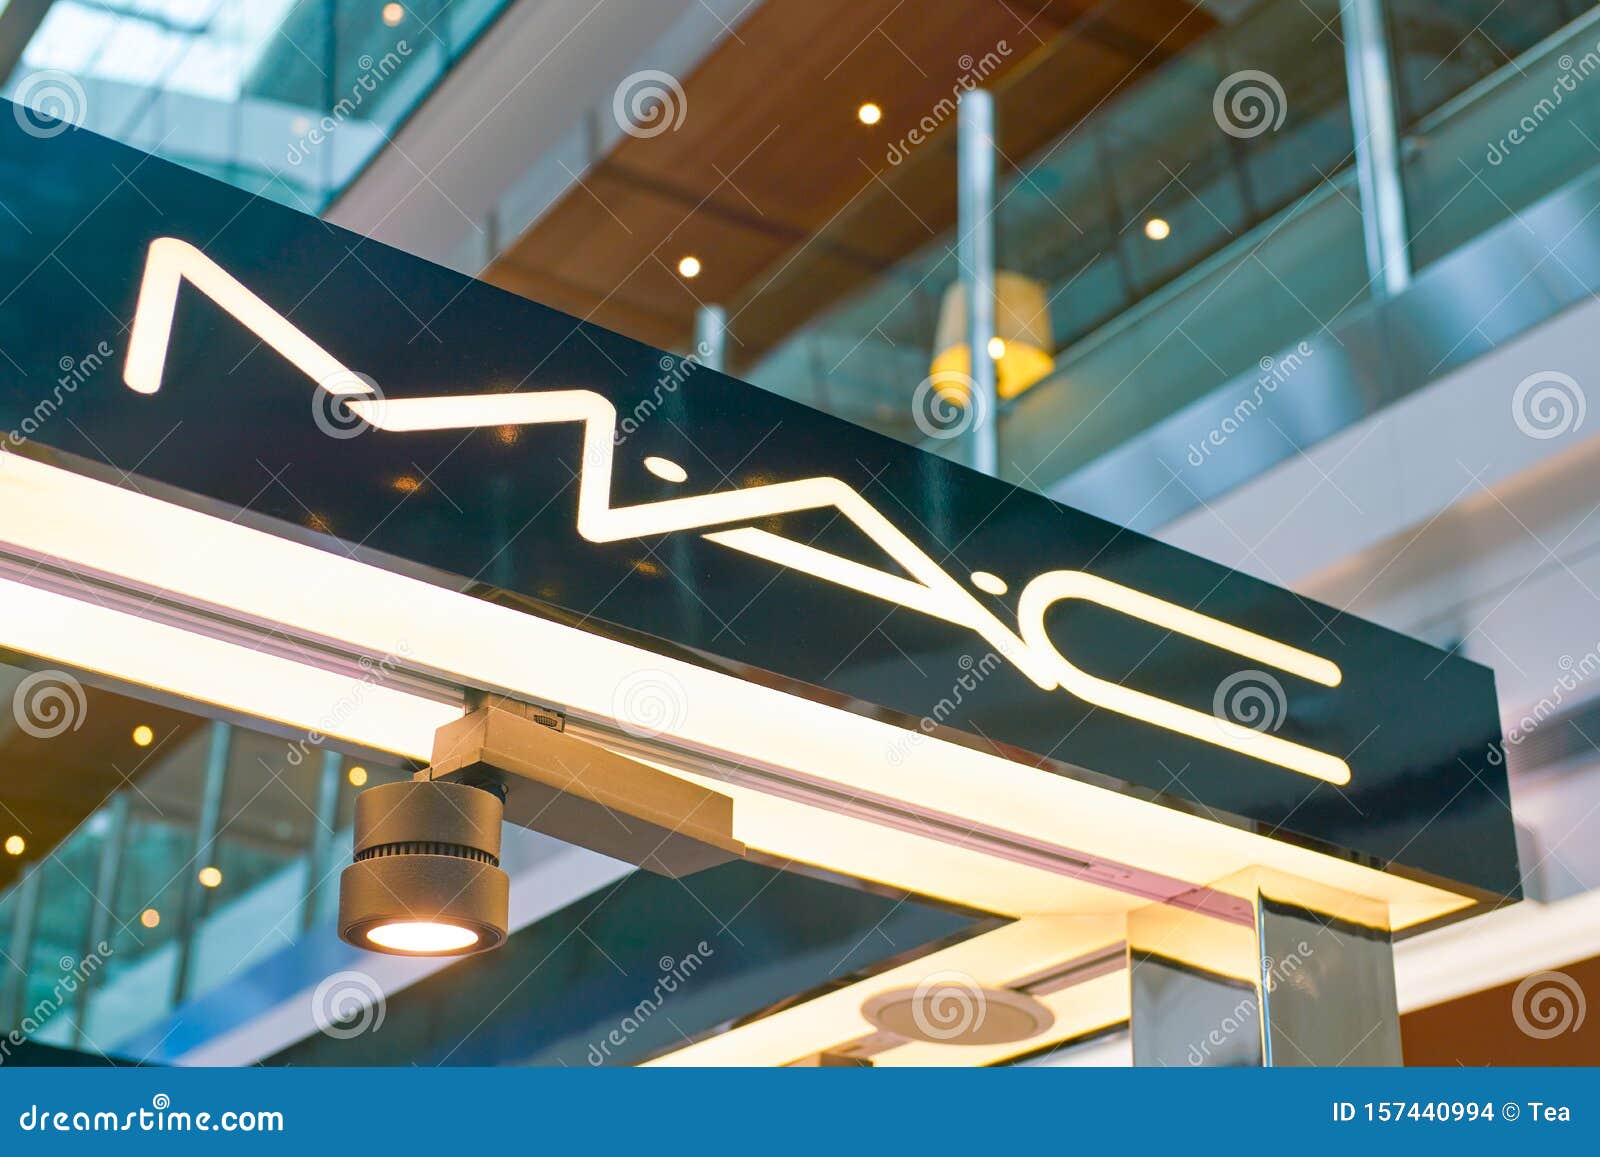 Close up shot of MAC sign editorial stock image. Image of dutyfree ...